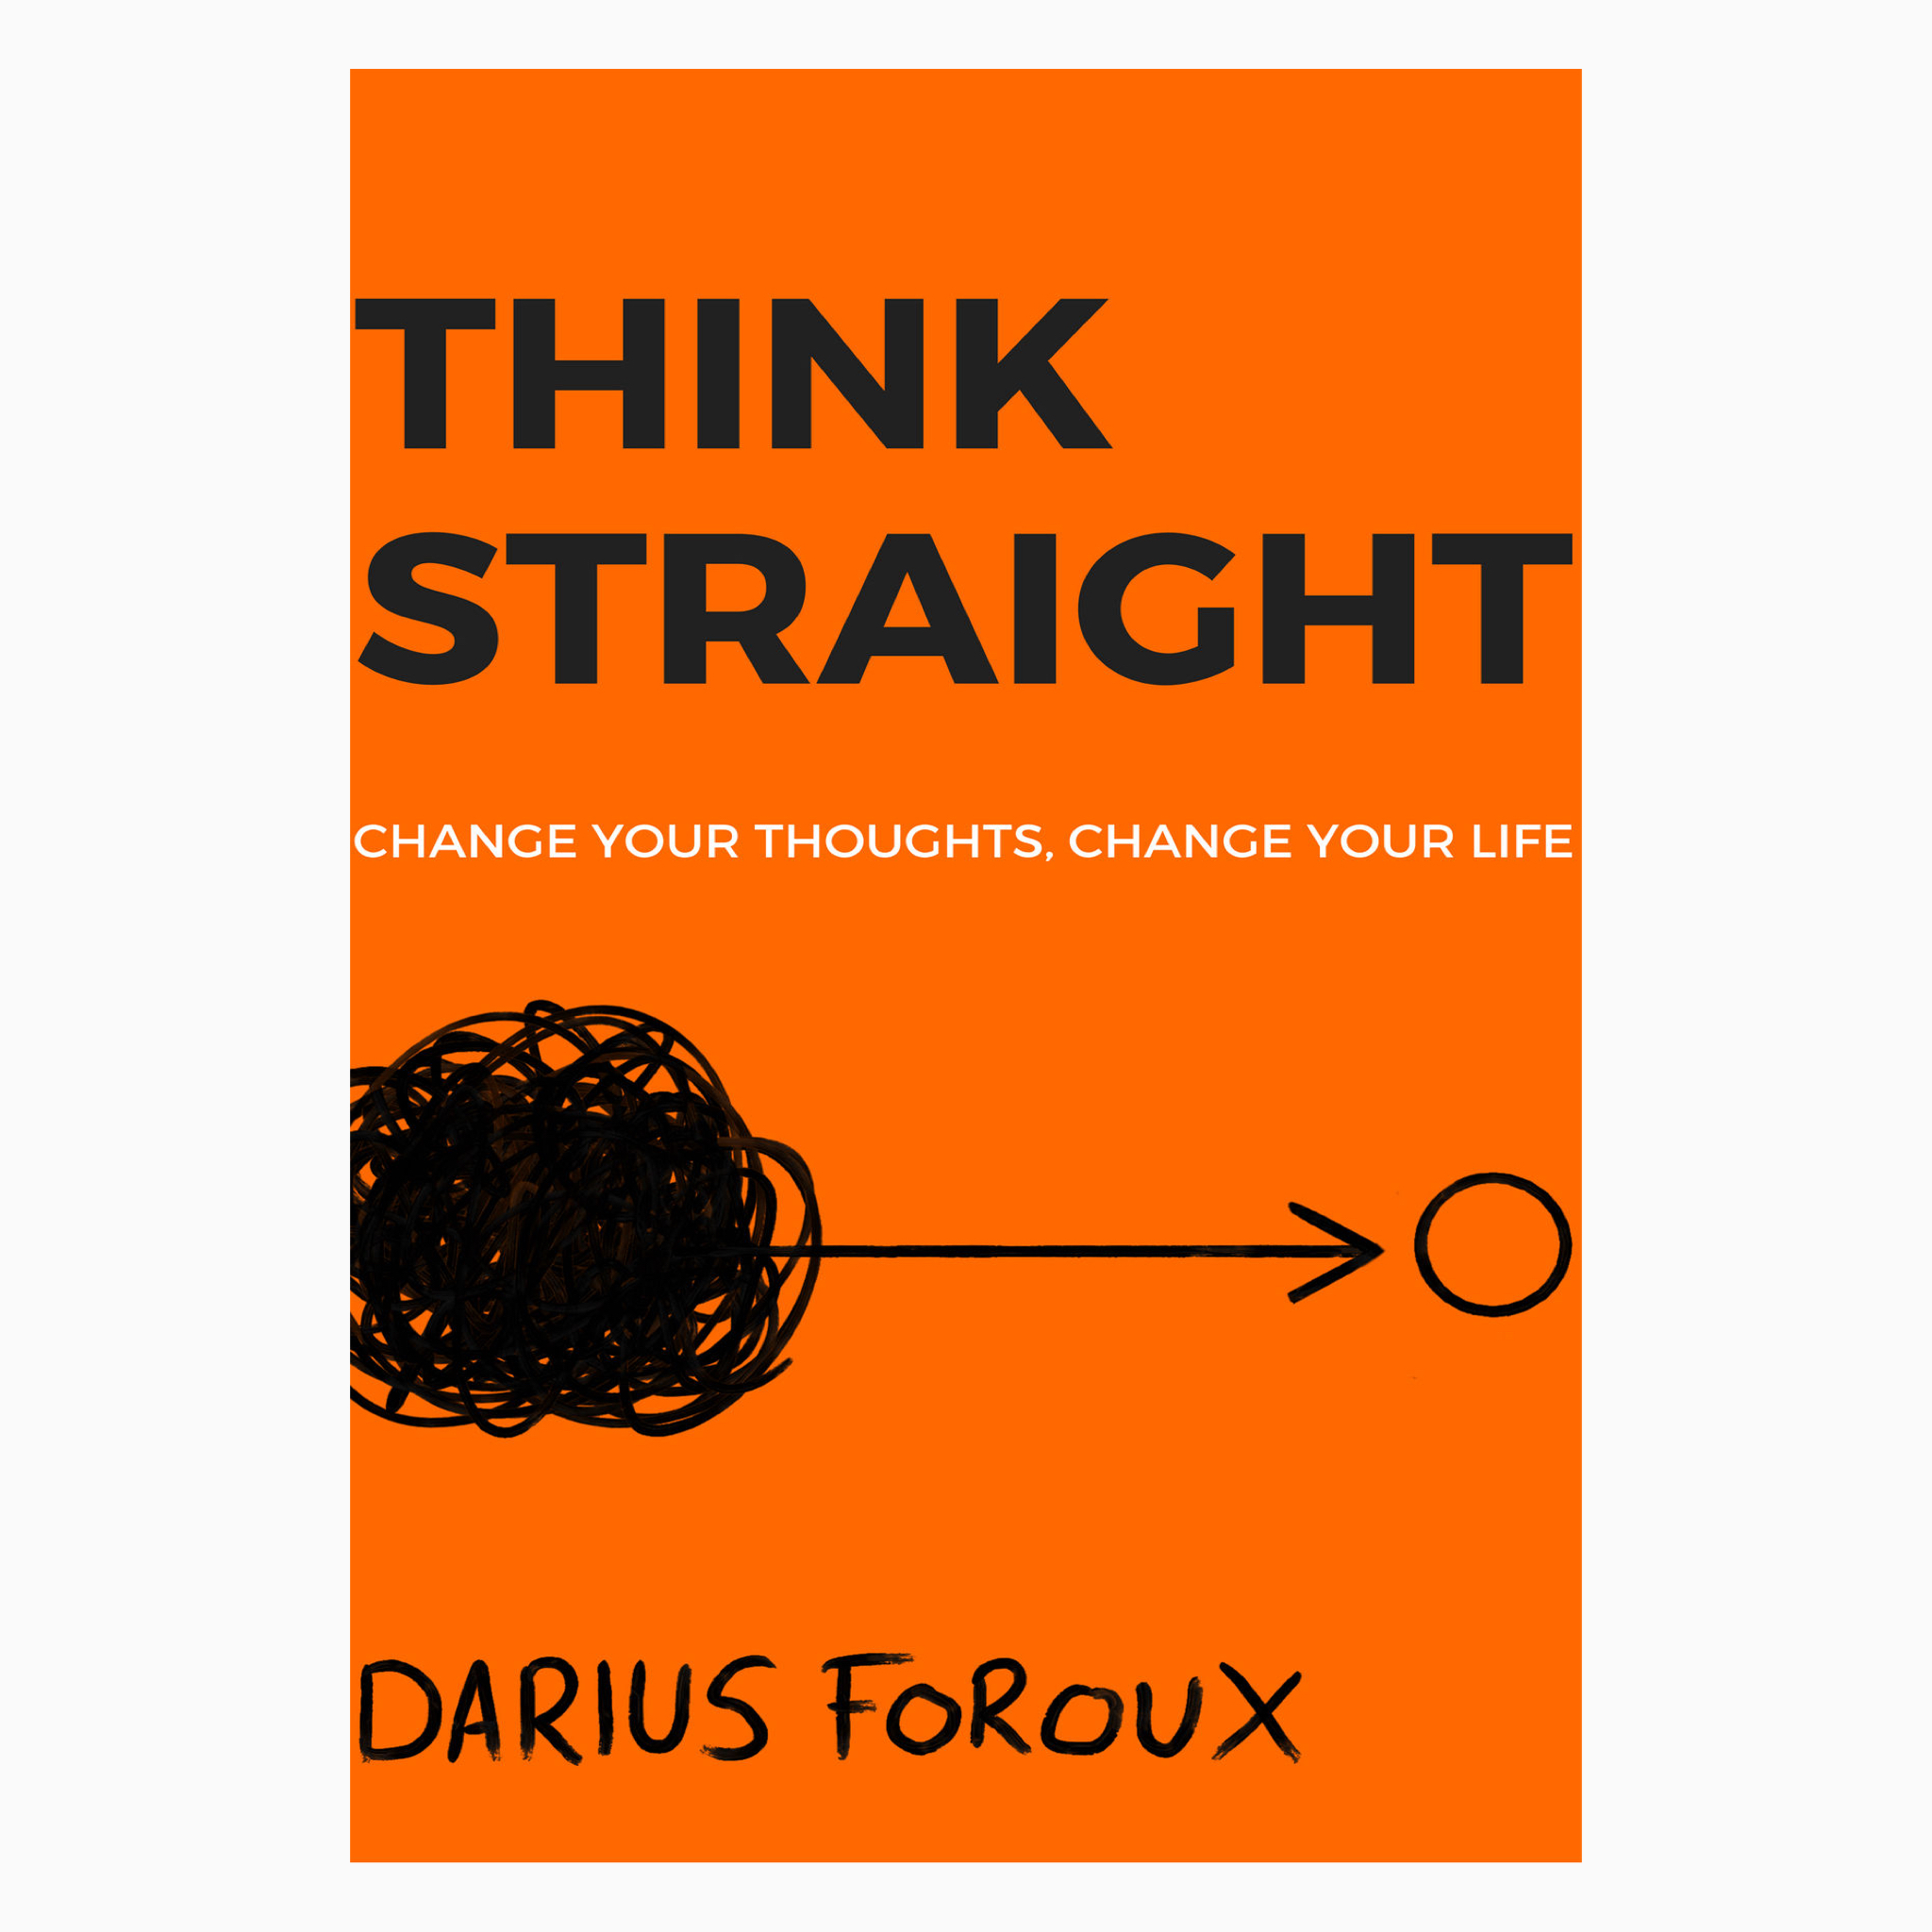 Think straight book by Darious Foroux